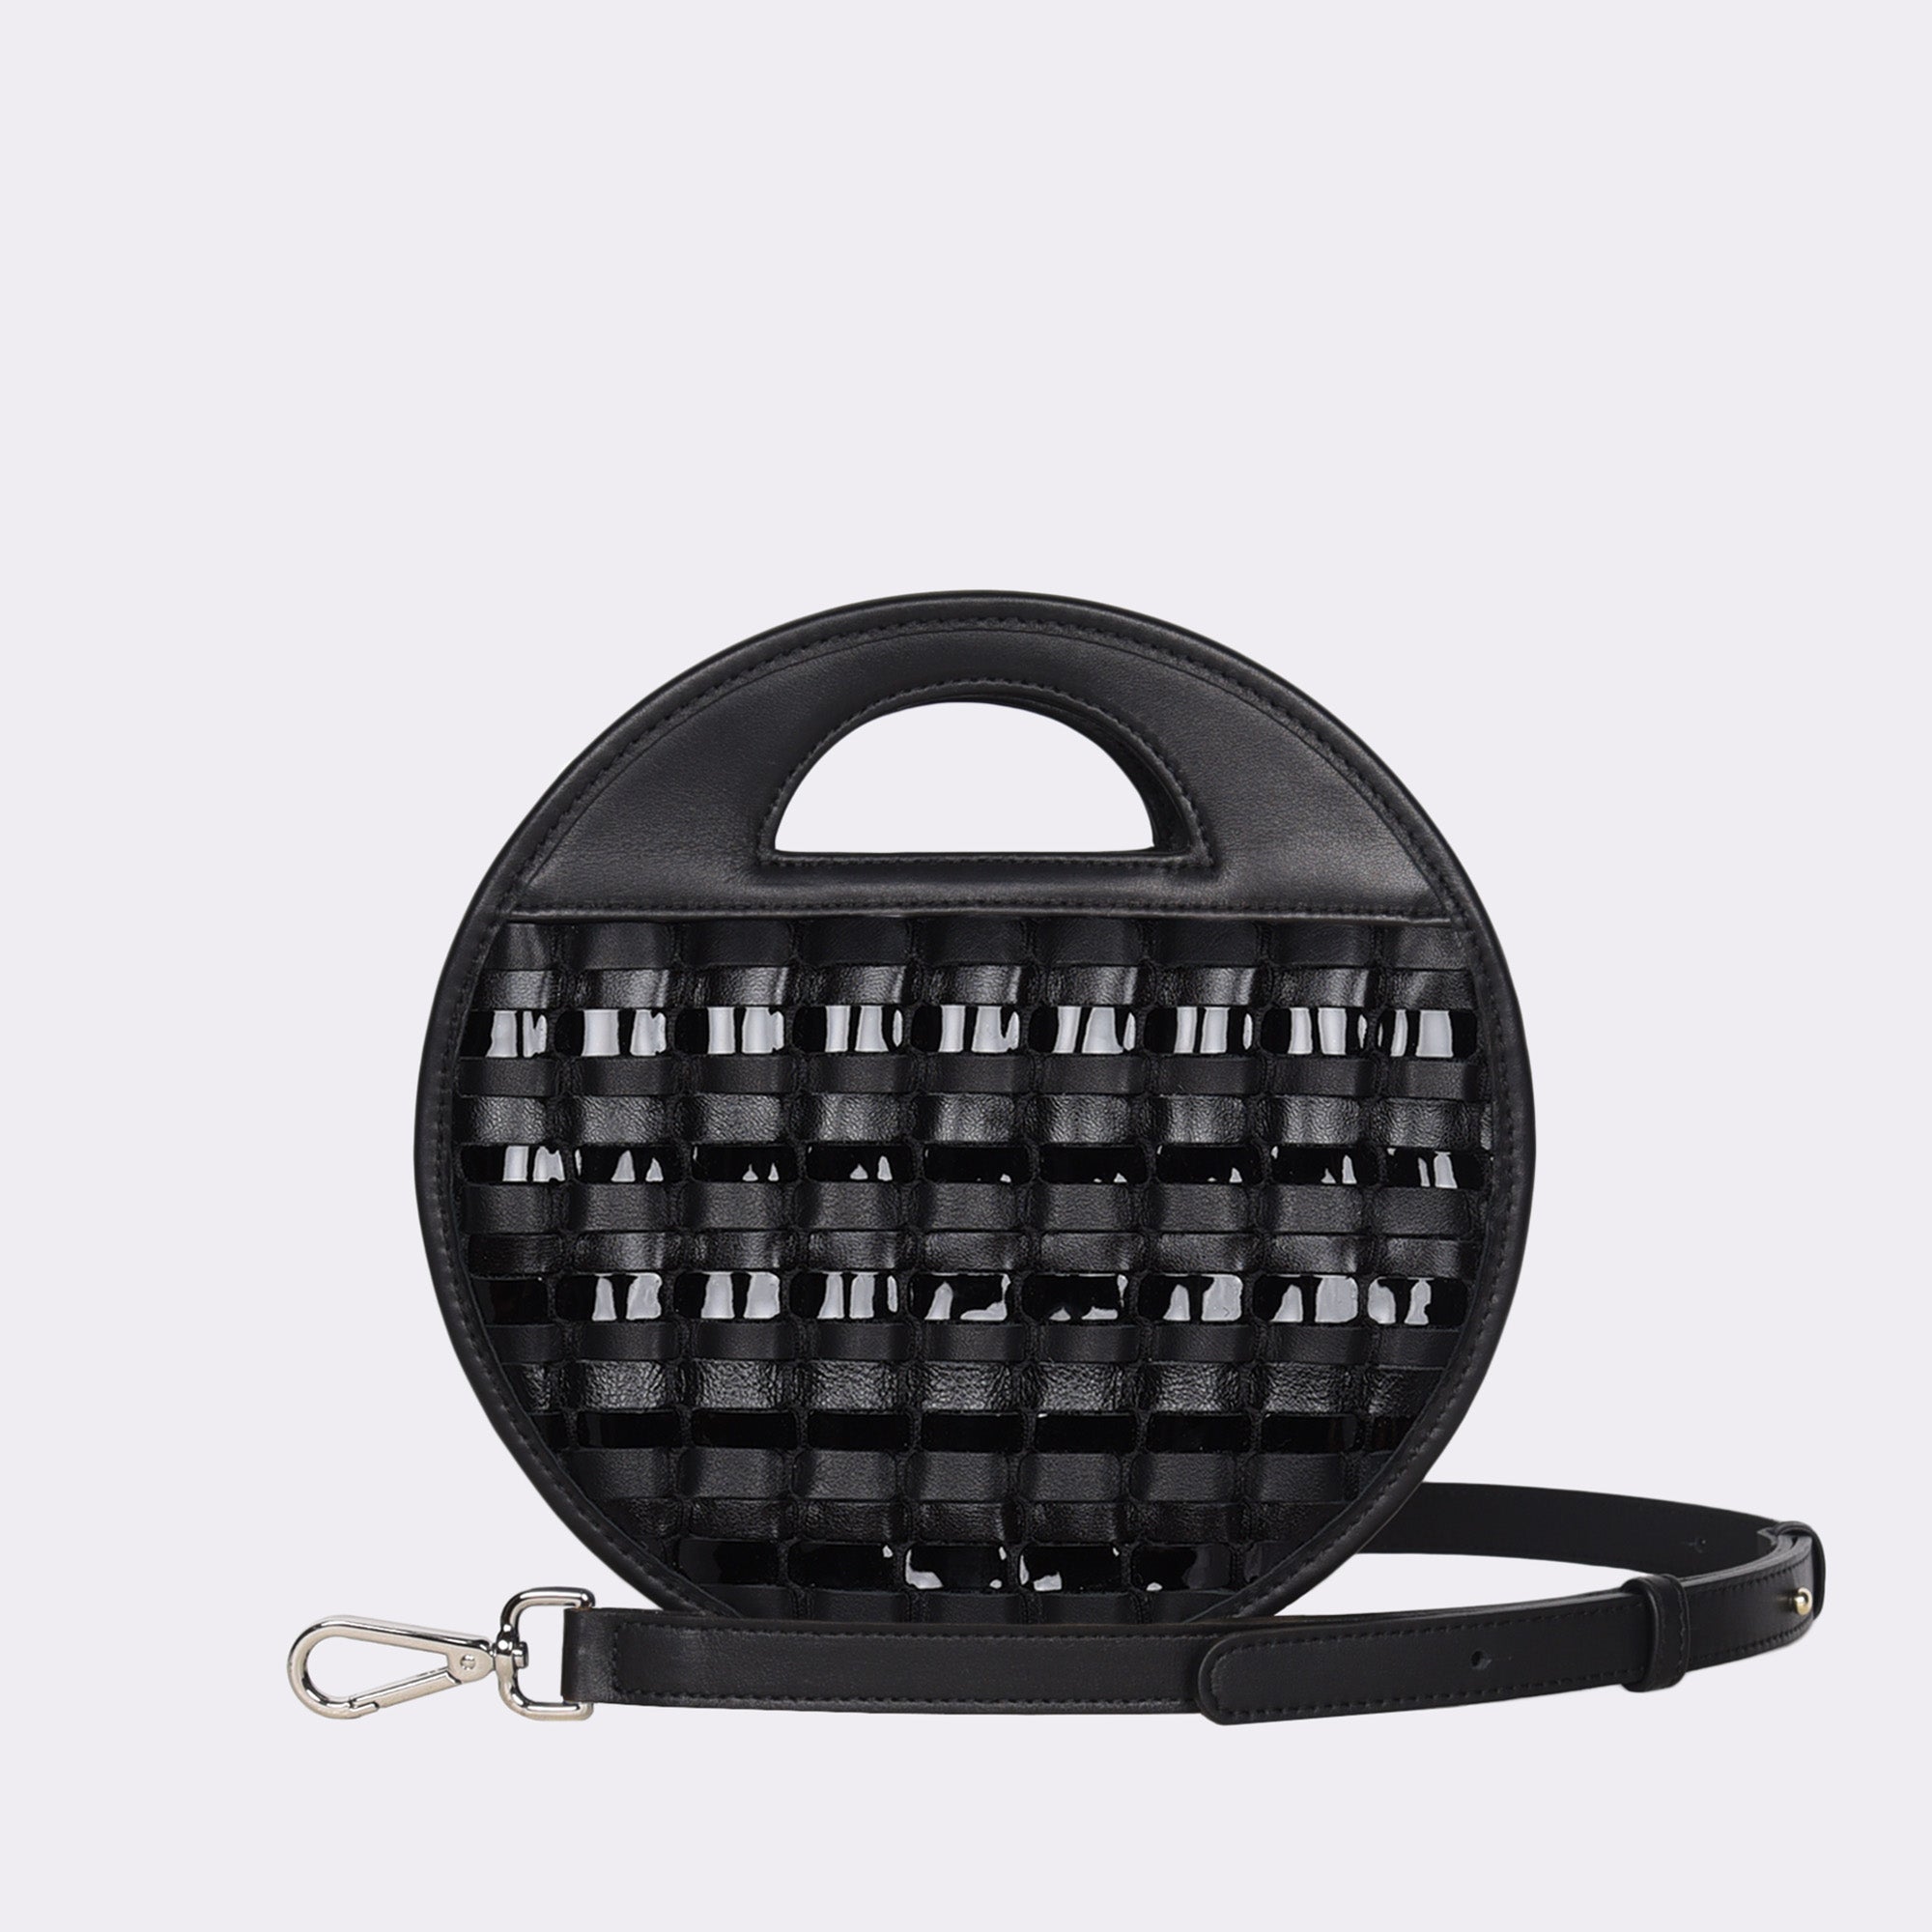 Picture of American made luxury top handle round crossbody bag with various matte and metallic black toned handwoven leathers.